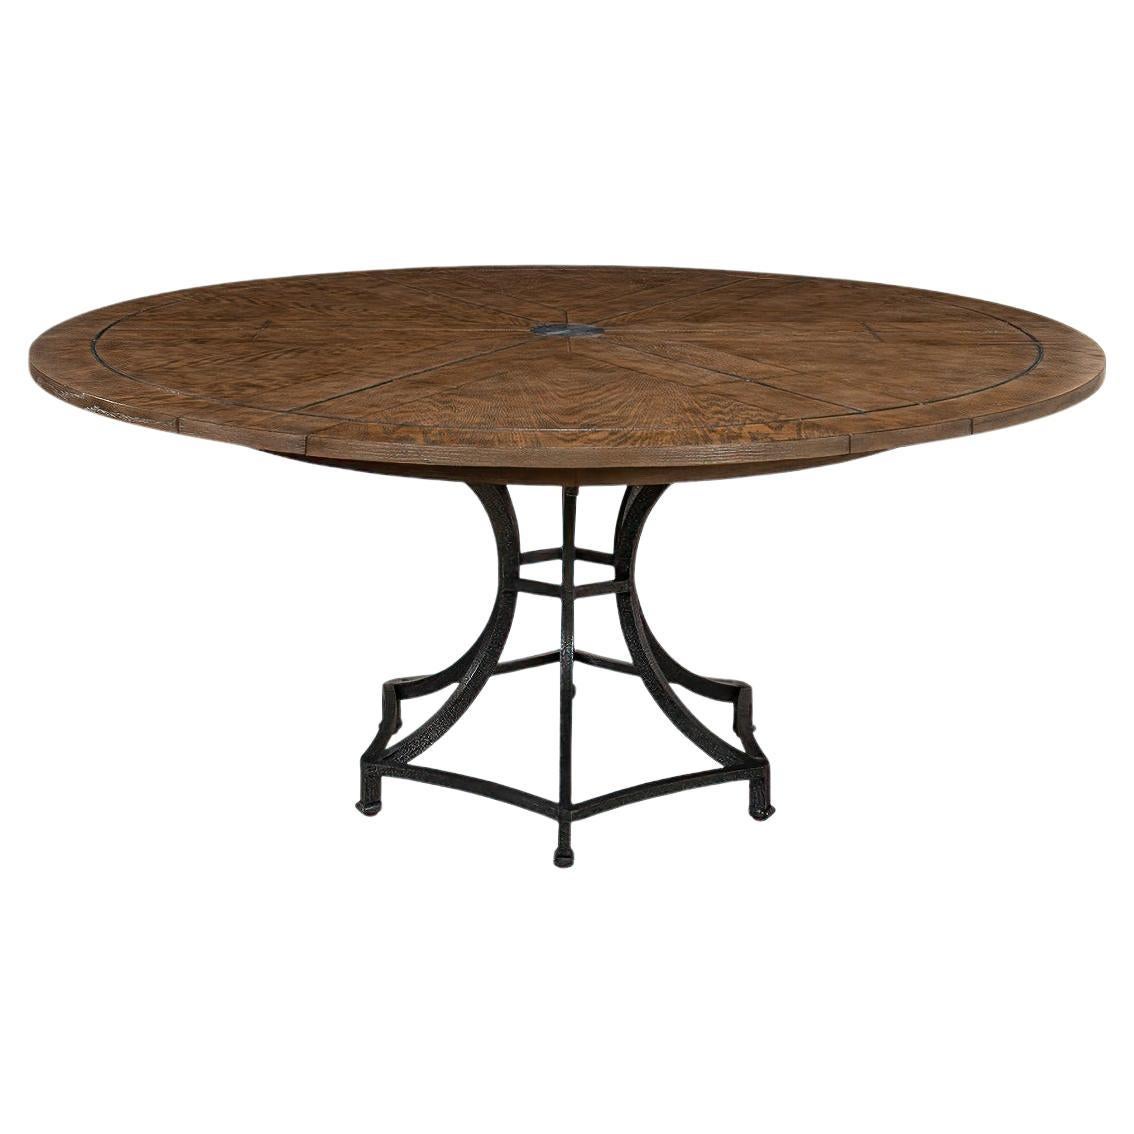 Modern Industrial Round Dining Table - Oak For Sale